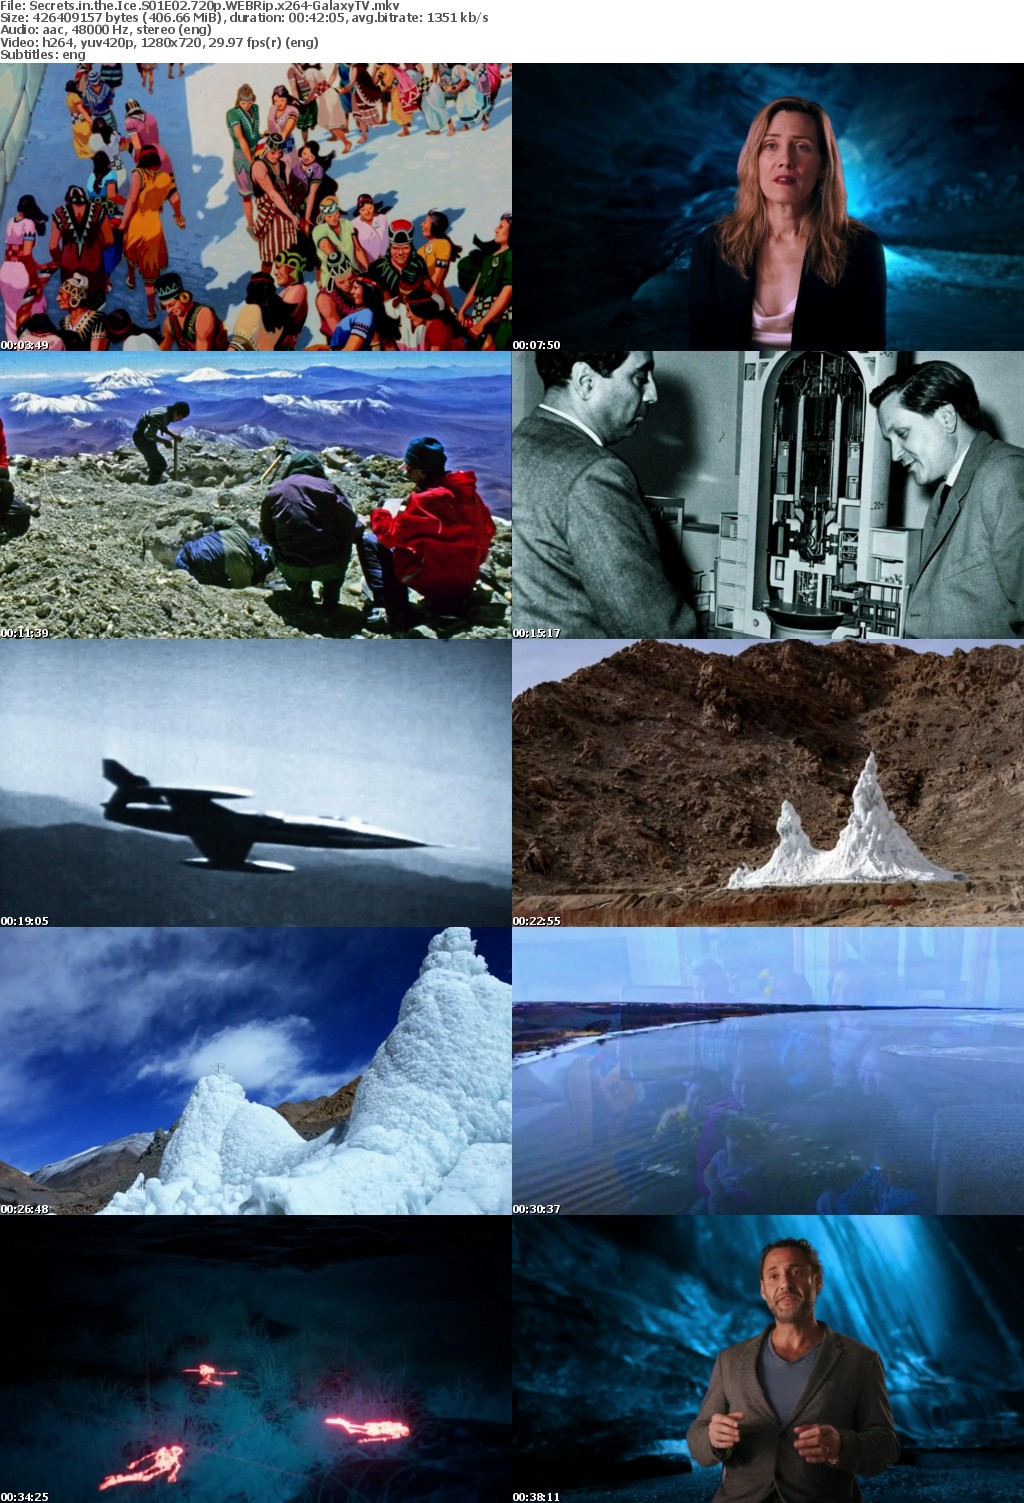 Secrets in the Ice S01 COMPLETE 720p WEBRip x264-GalaxyTV